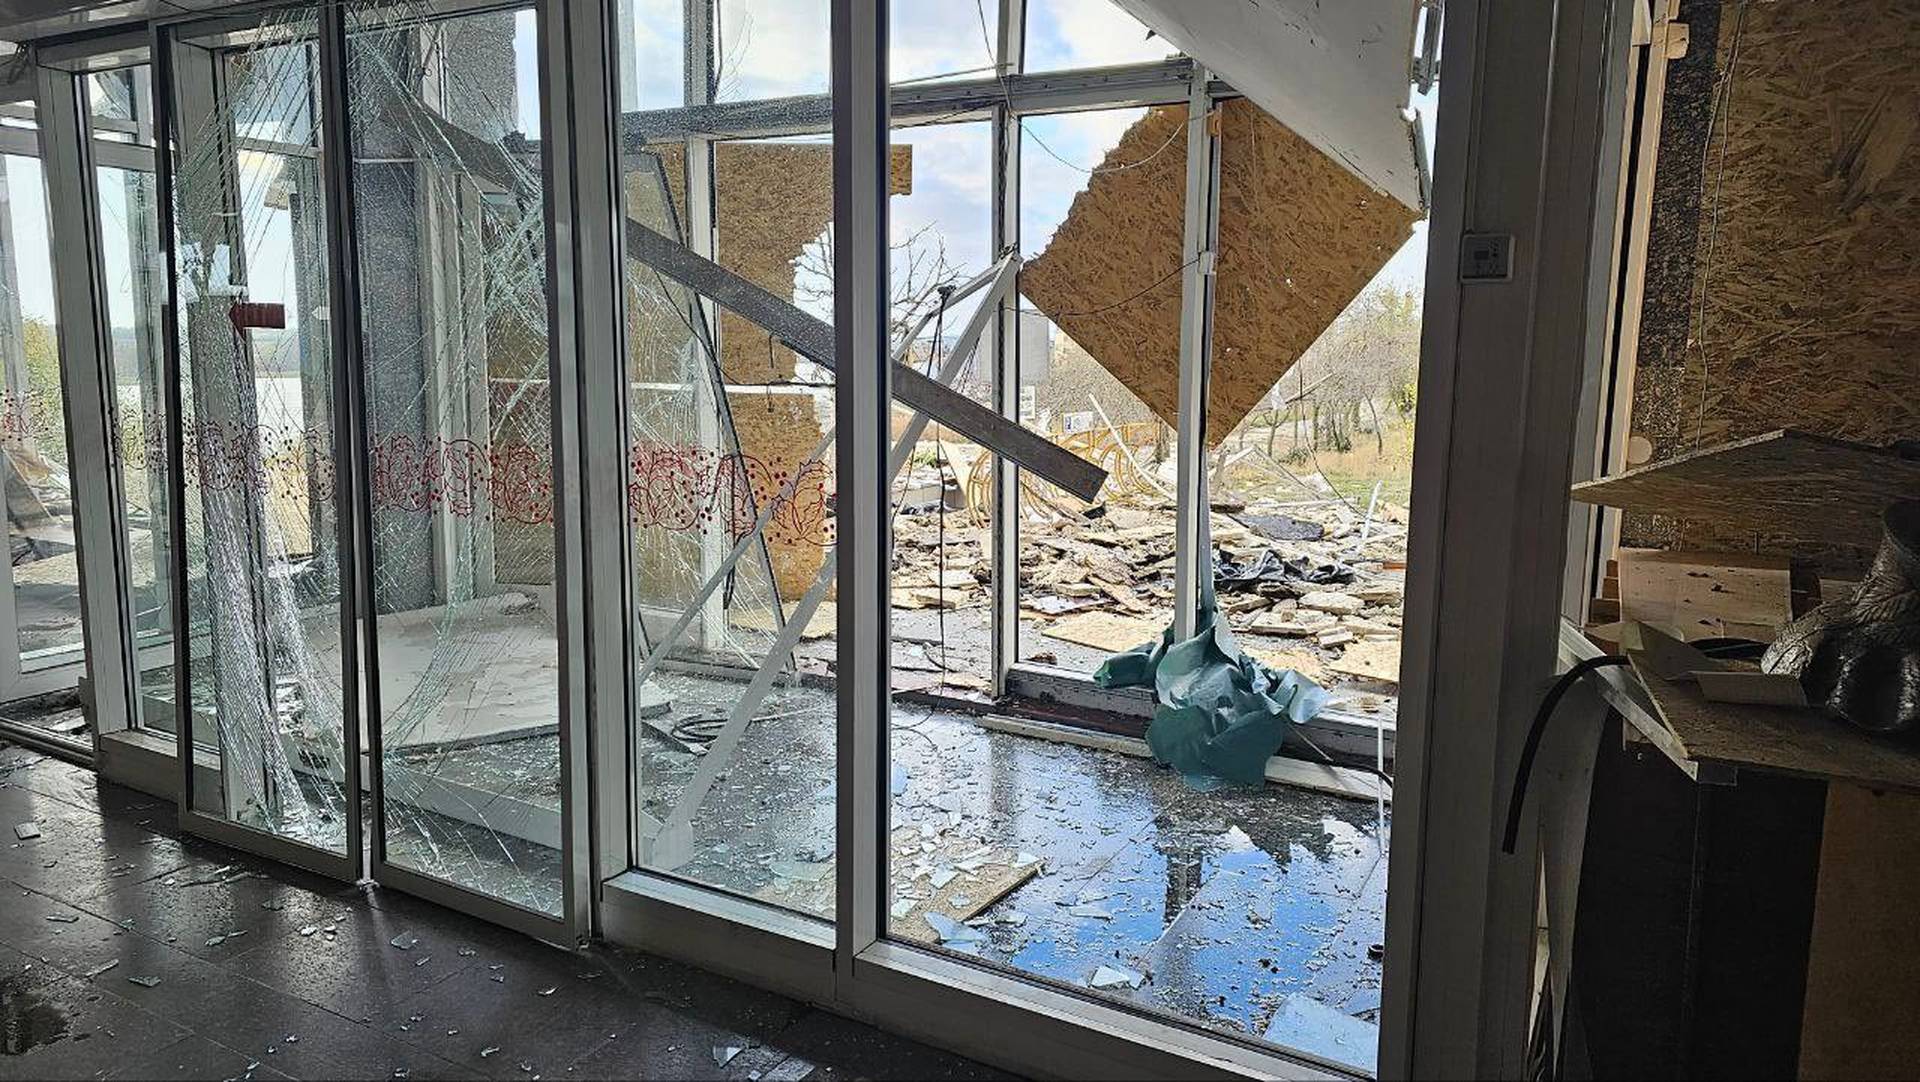 The local library building in Kherson was severely damaged